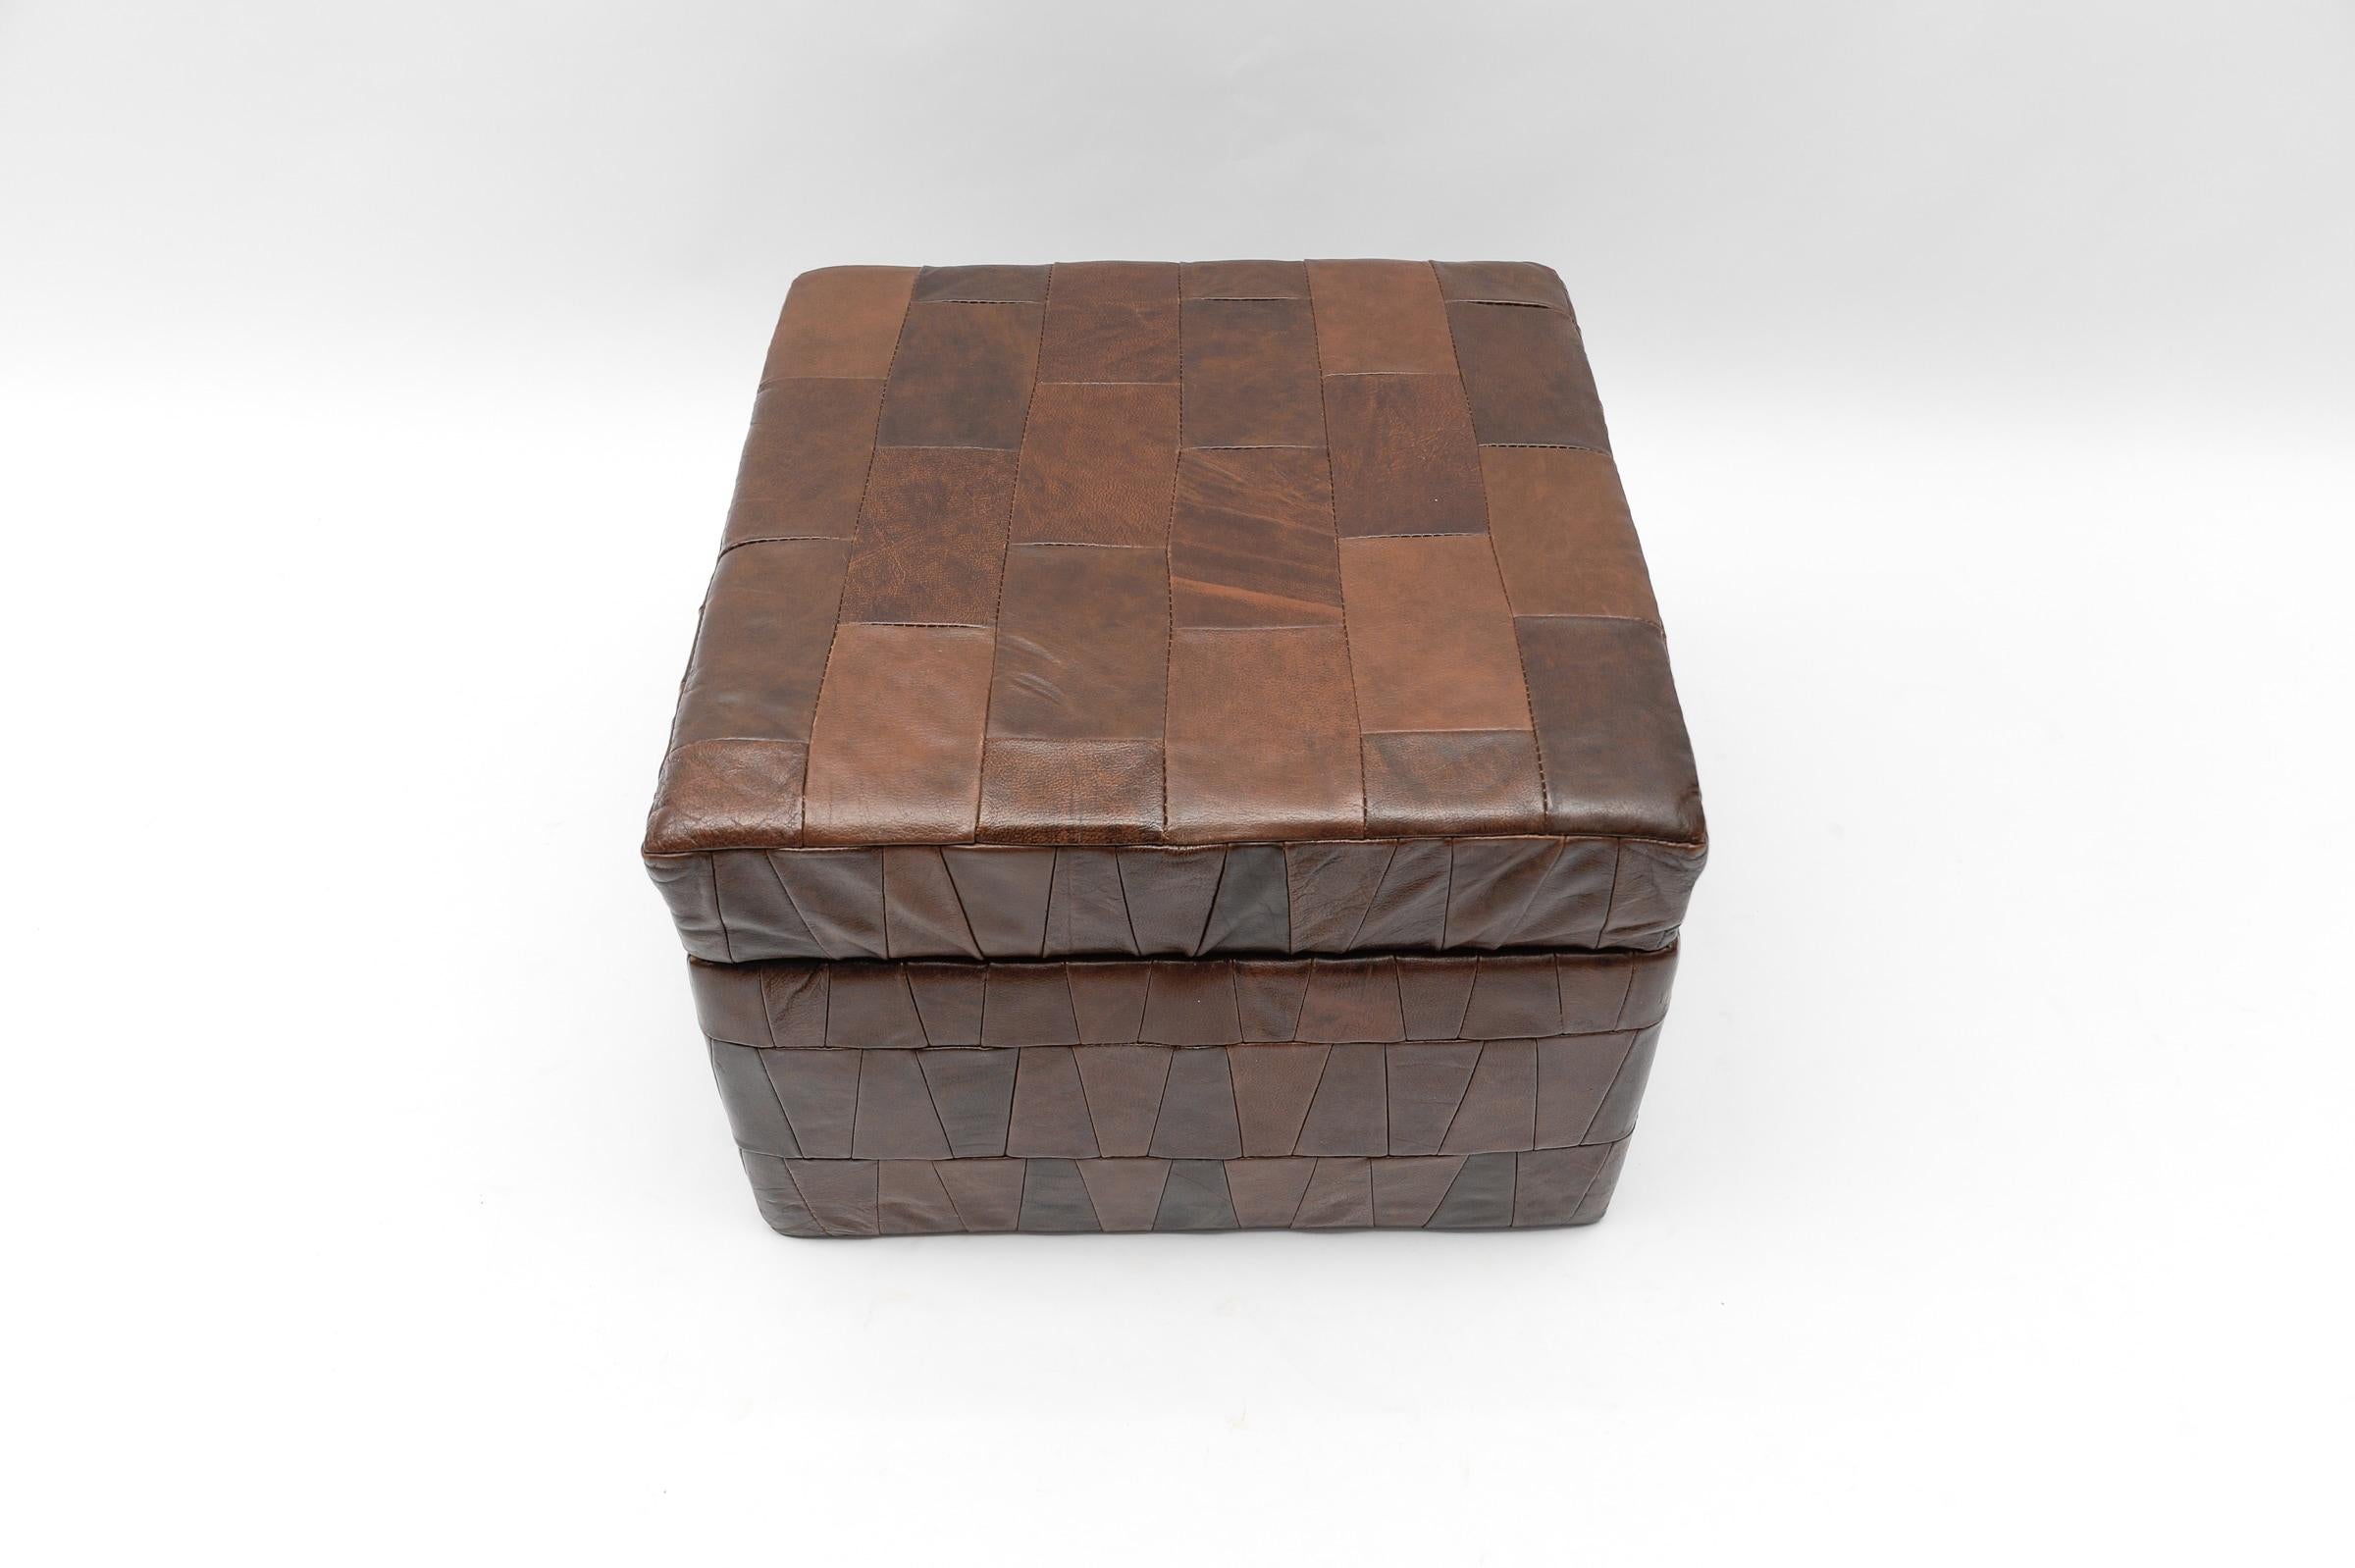 Choco Brown Leather Patchwork Pouf with Storage Space from De Sede, 1960s For Sale 2